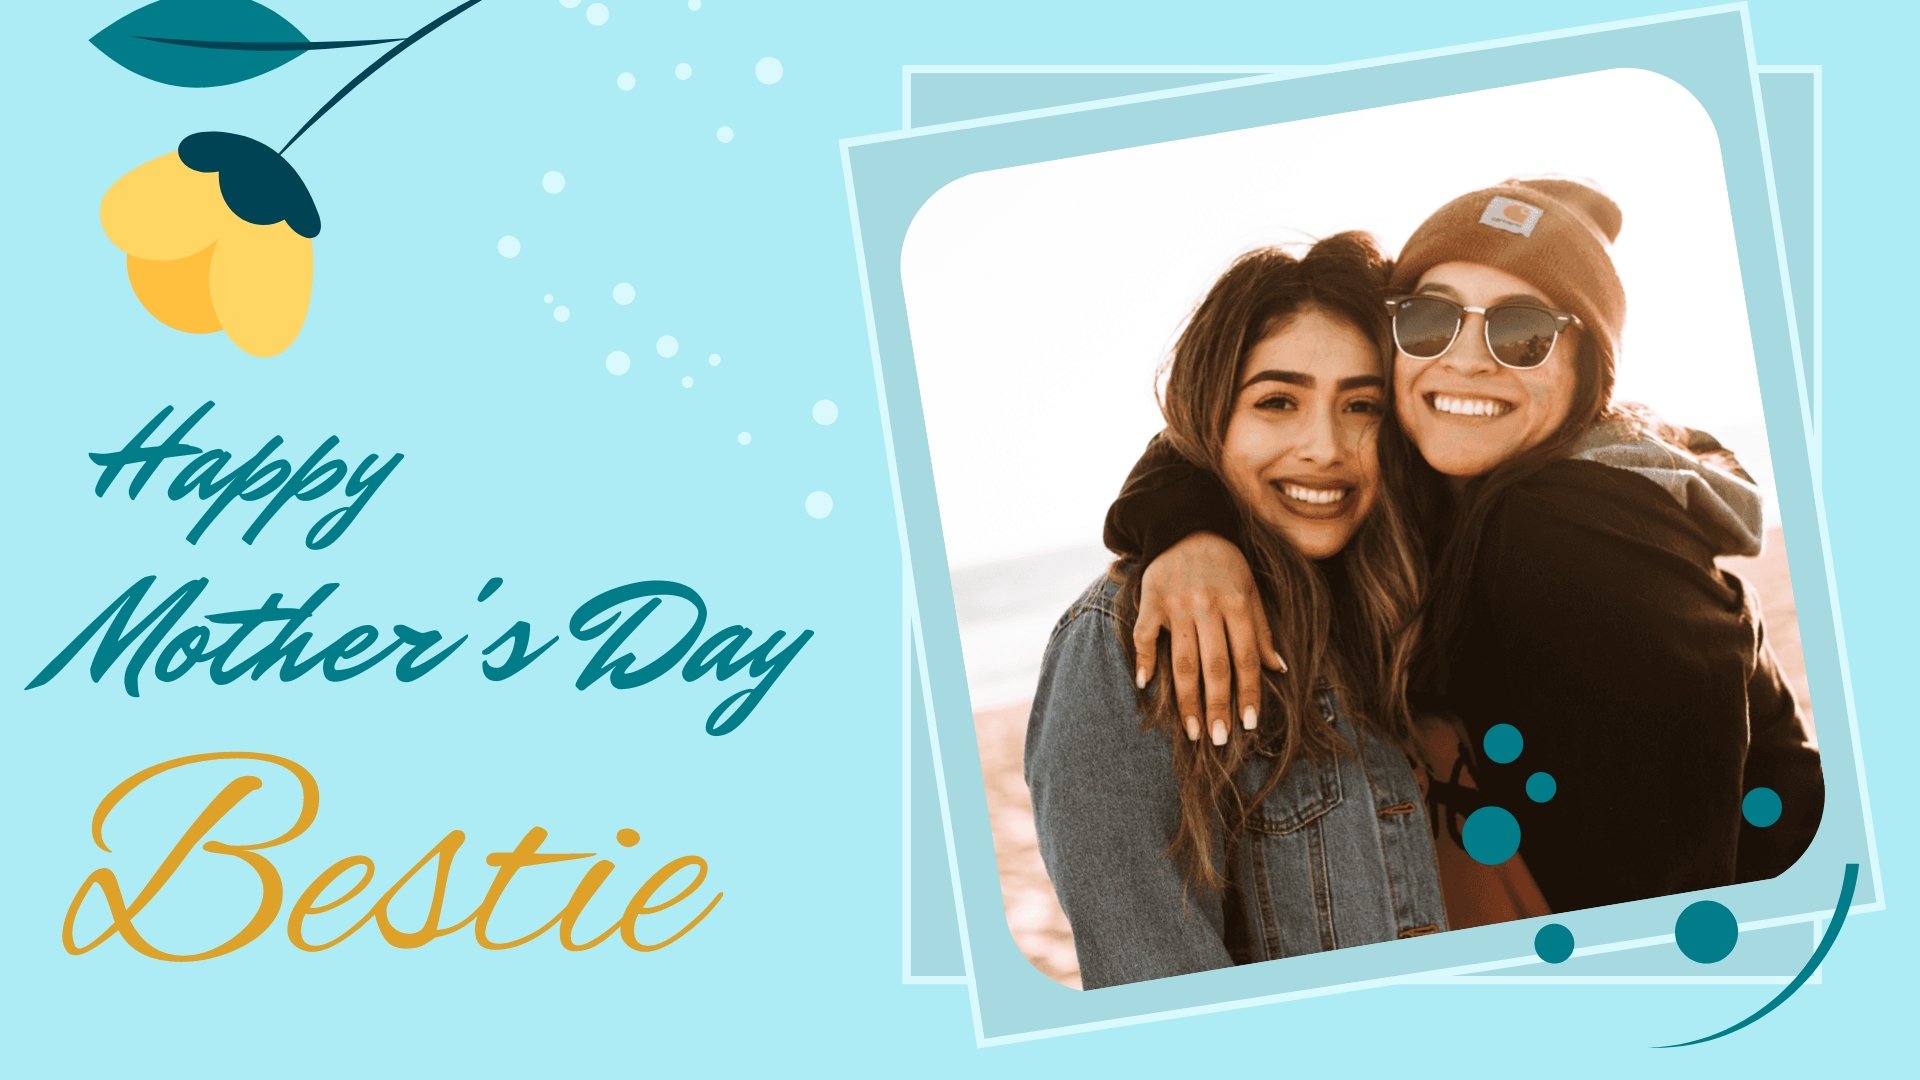 Happy Mother's Day To My Best Friend Image Template